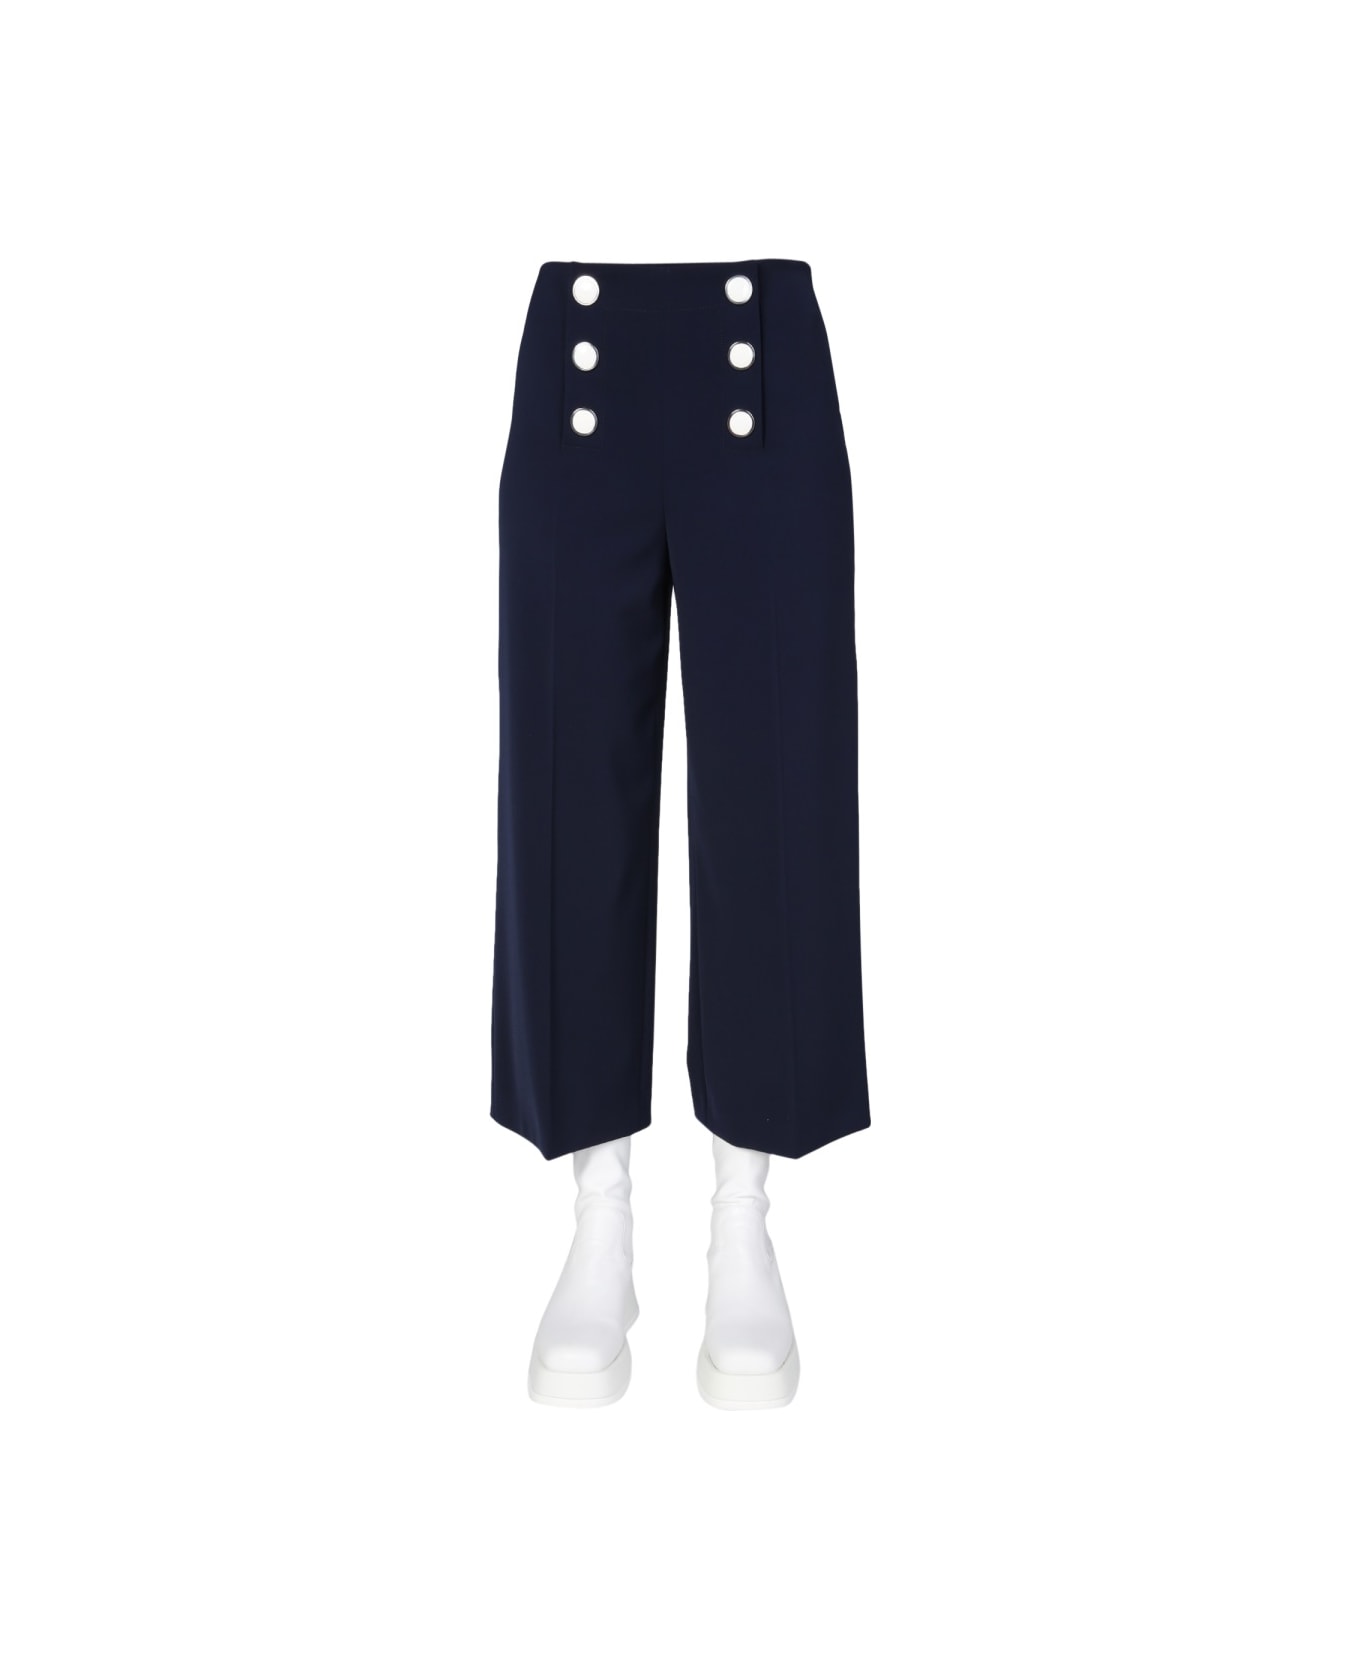 Boutique Moschino Wide Leg Trousers - BLUE ボトムス